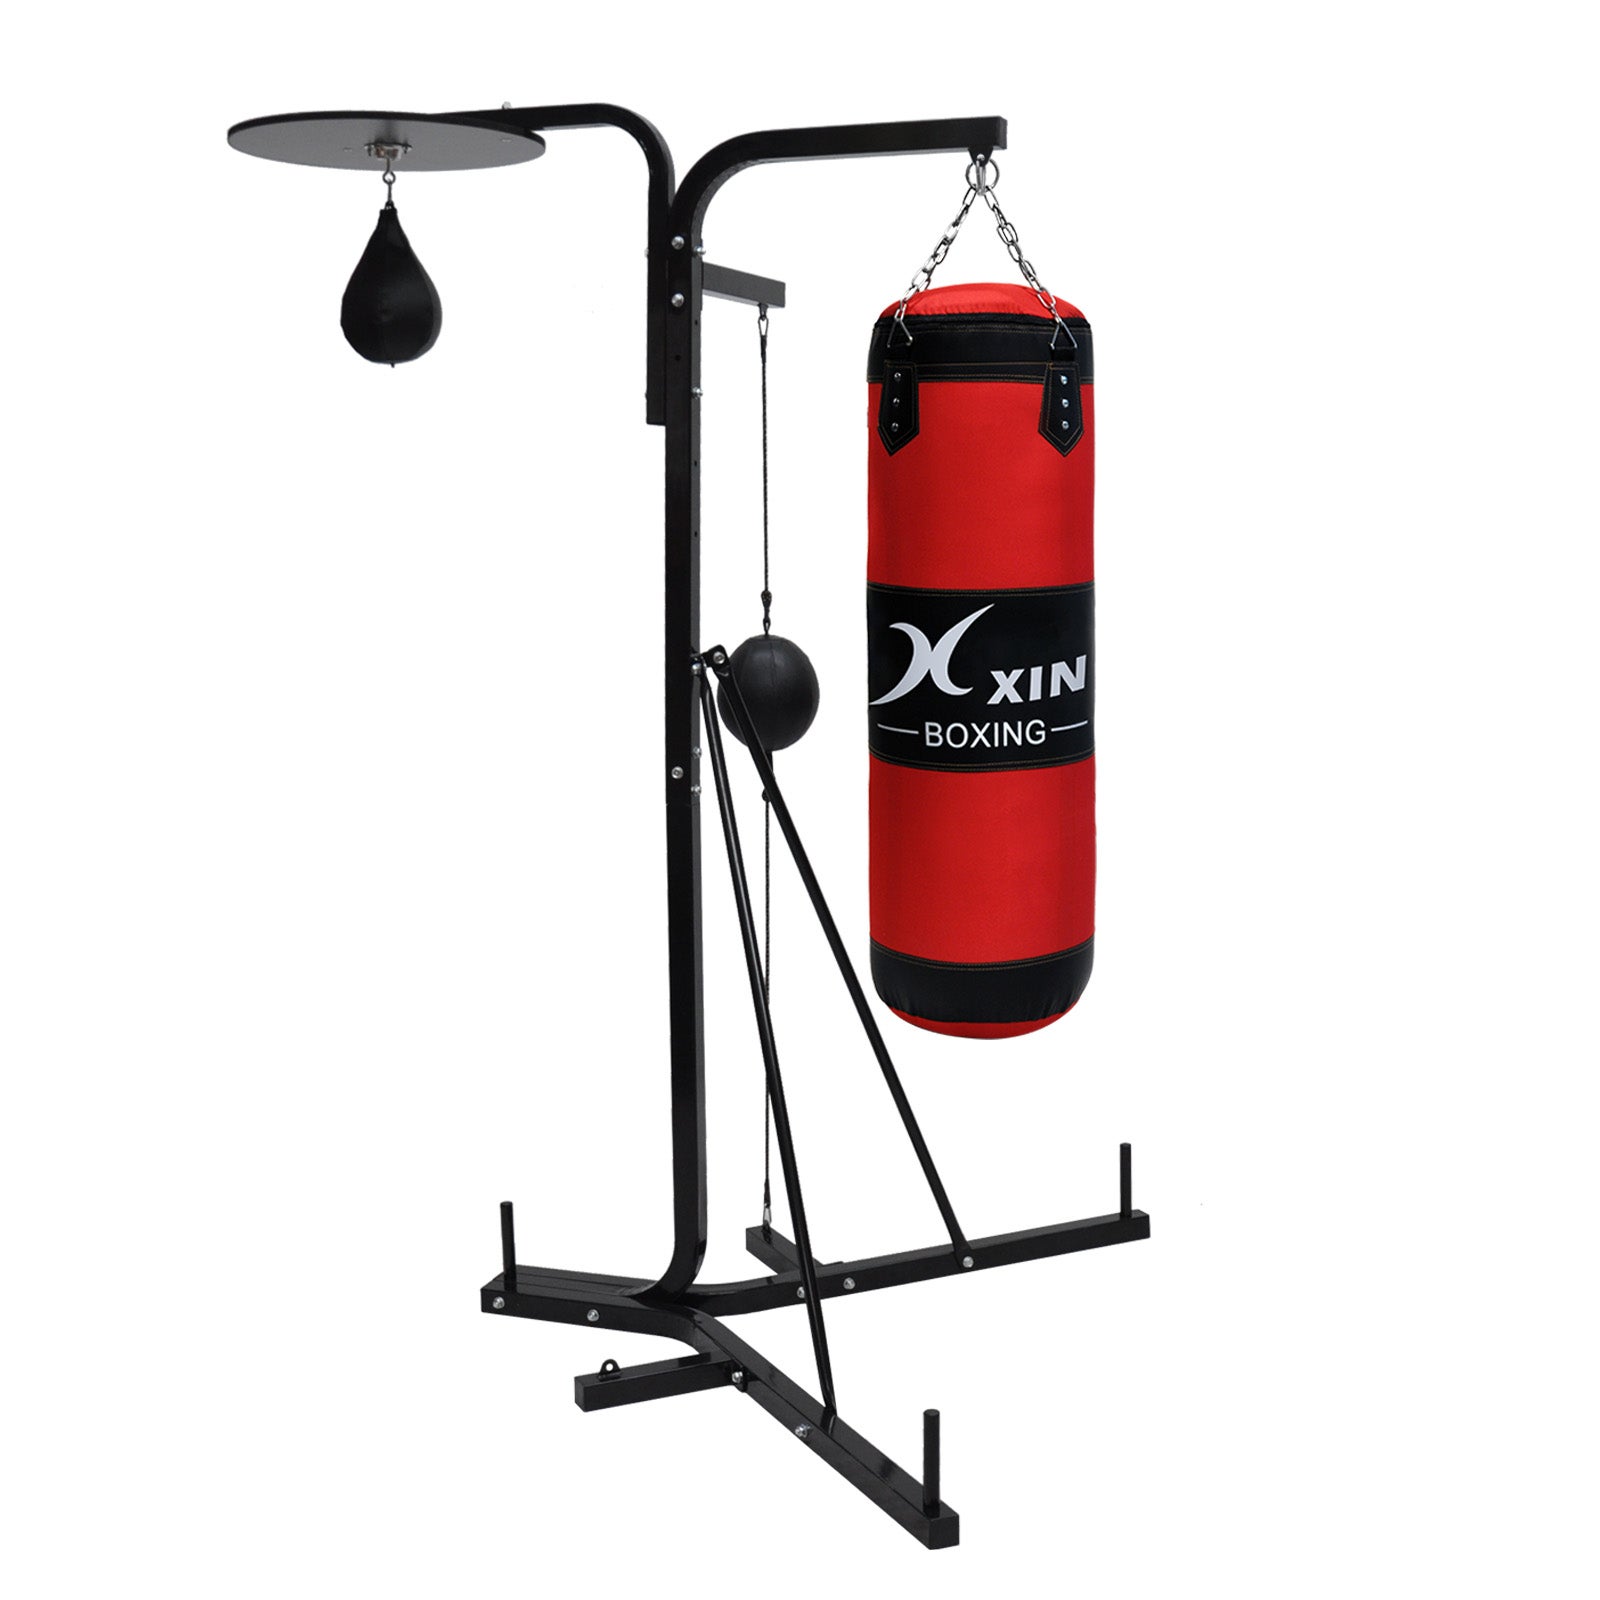 How To Hang Your Speed Bag Properly